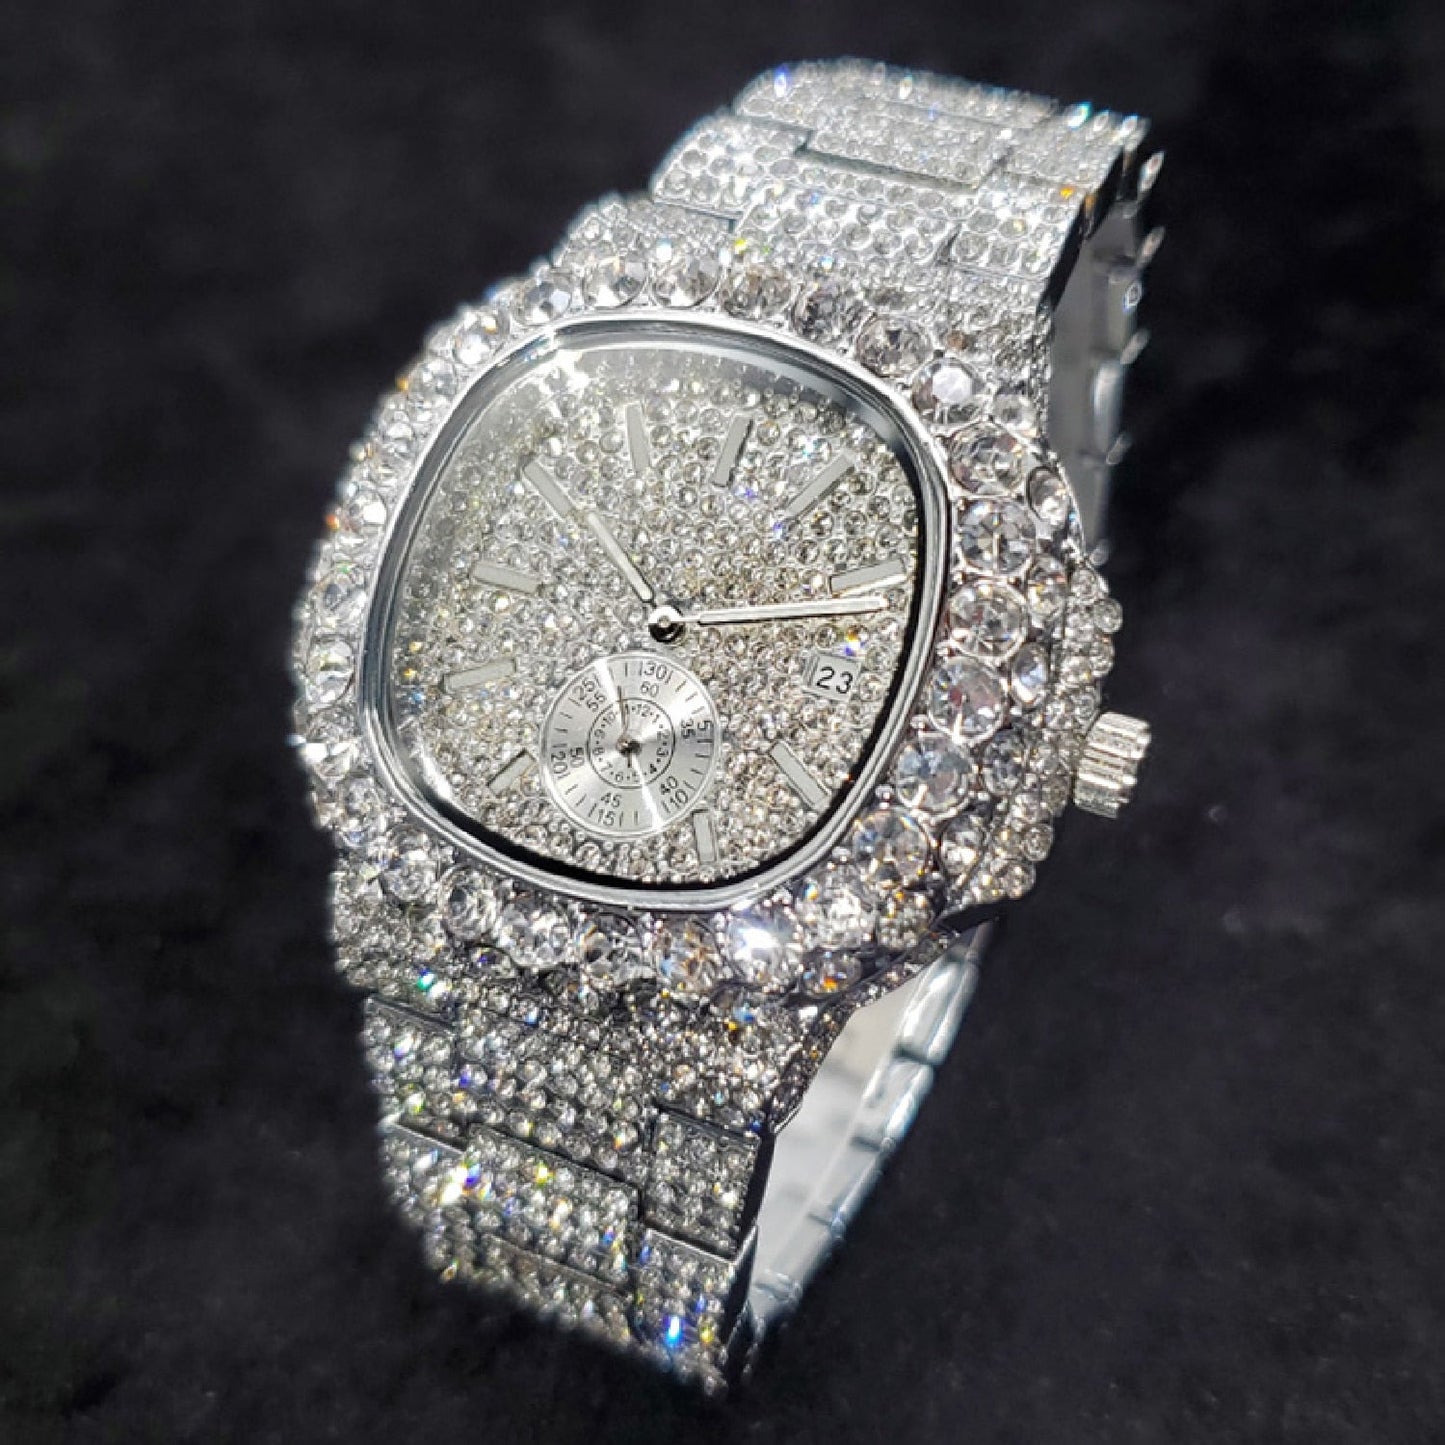 New Moissanite Watch Iced Out